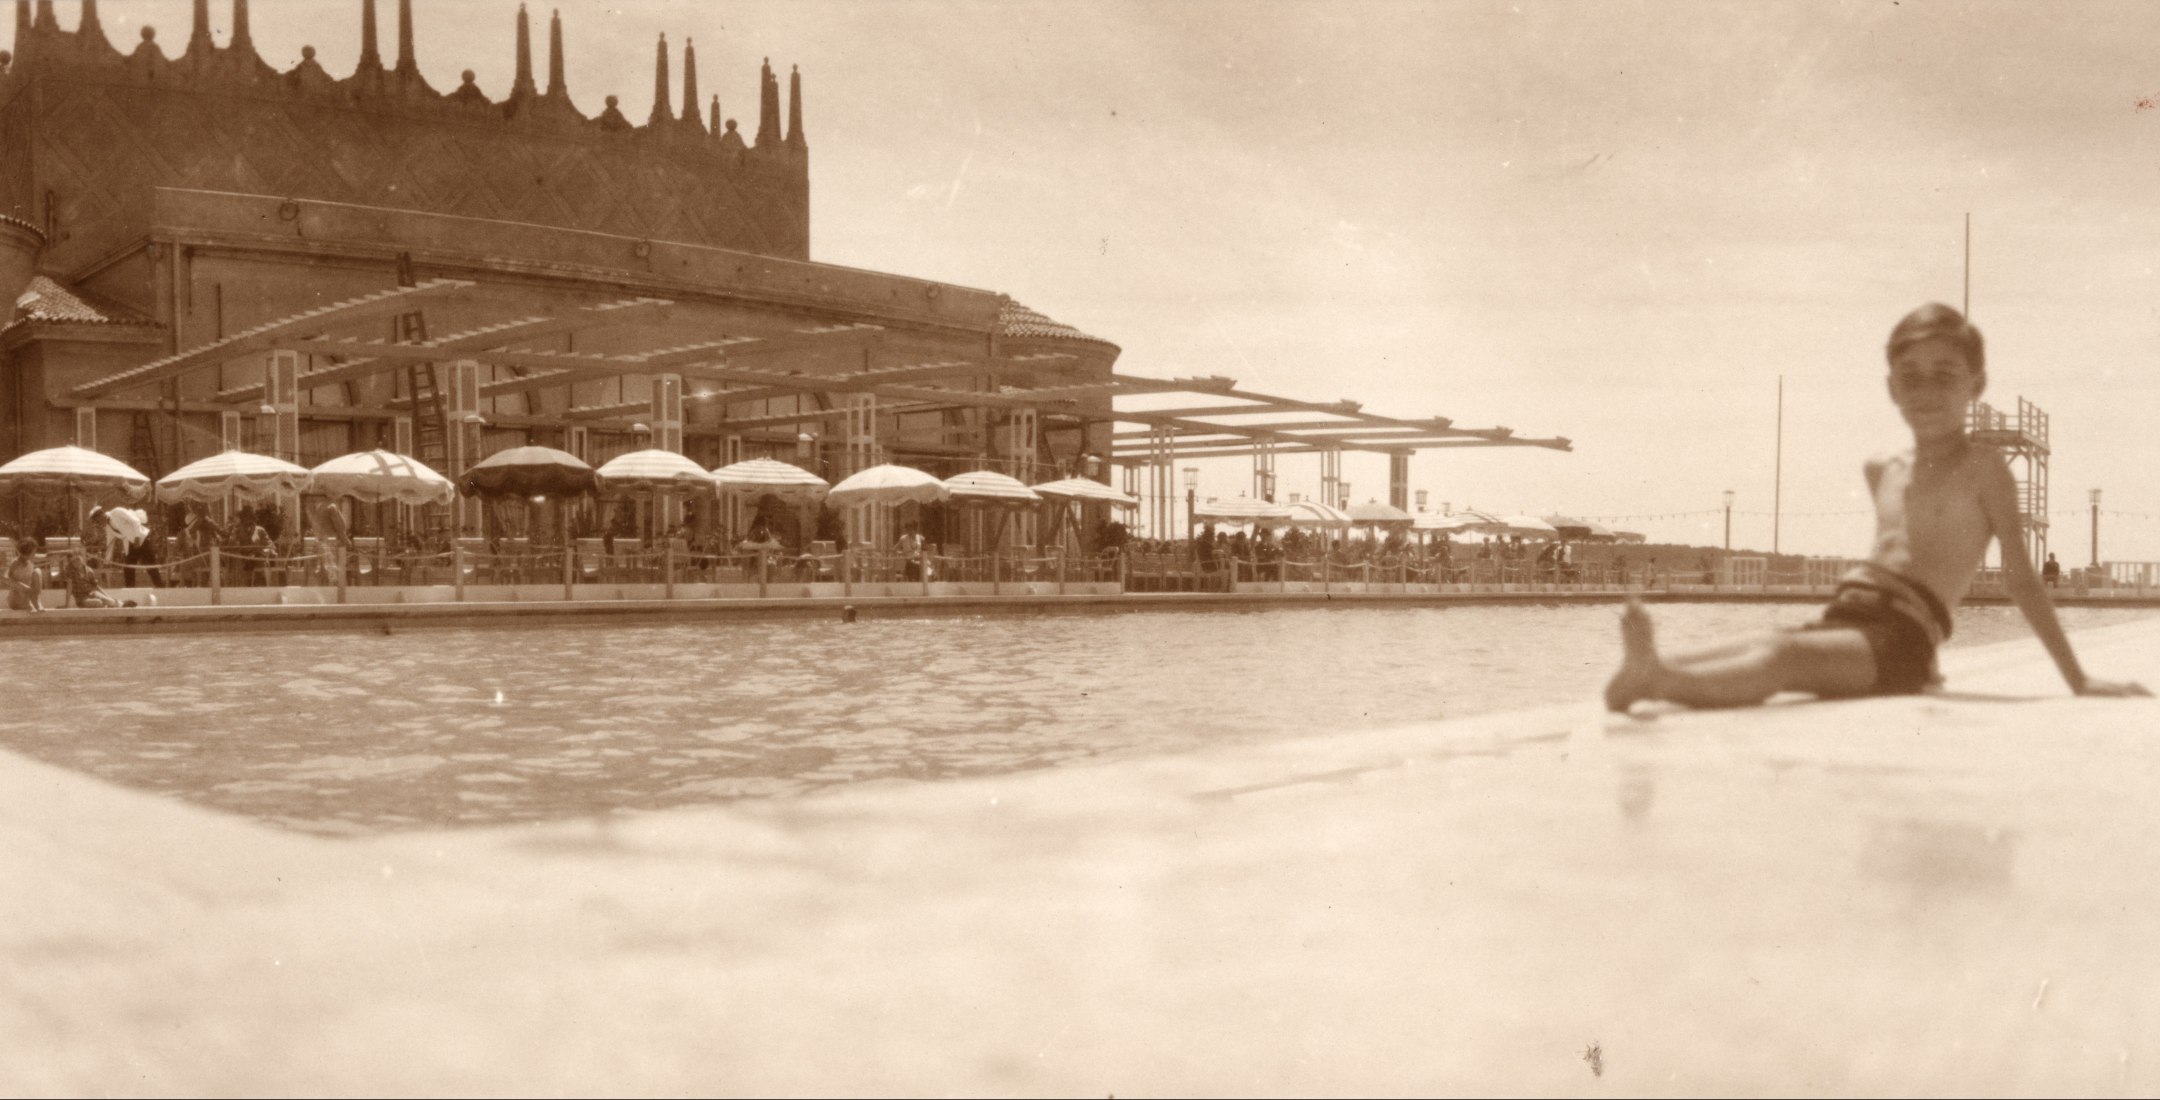 Early 20th century black and white photo of a young boy siting by a resort pool.